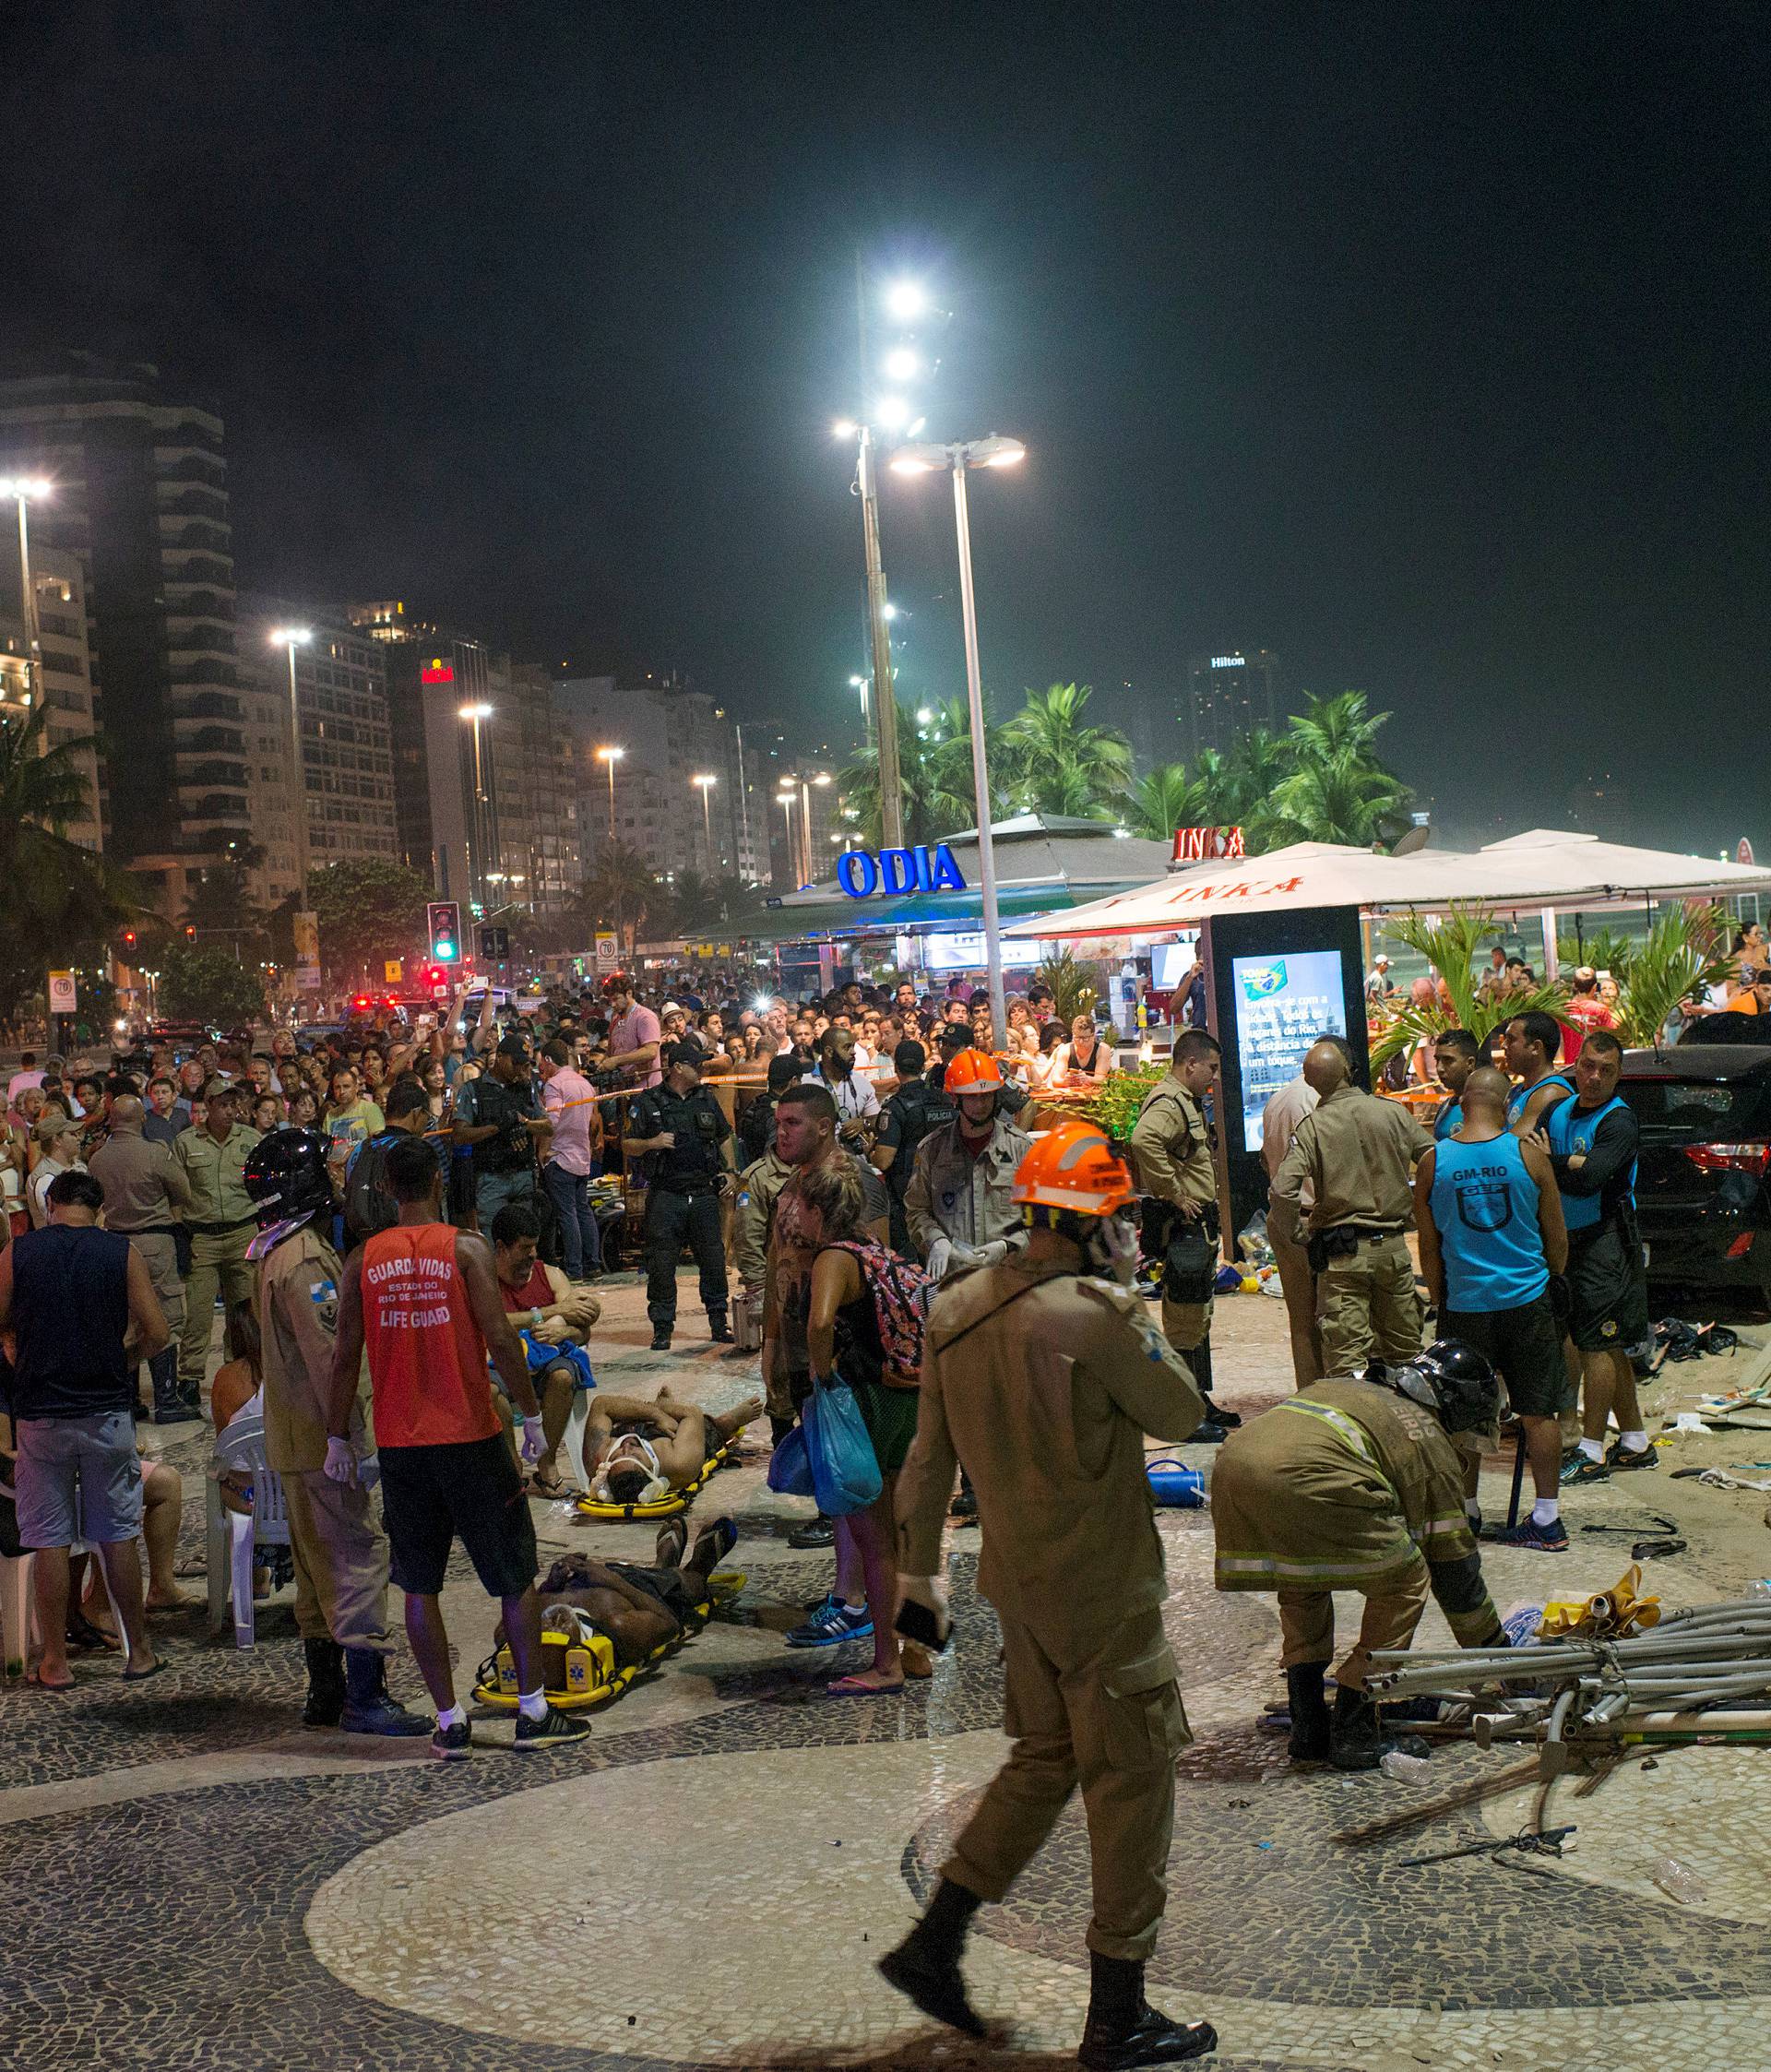 Paramedics help the injured after a vehicle ran over some people at Copacabana beach in Rio de Janeiro